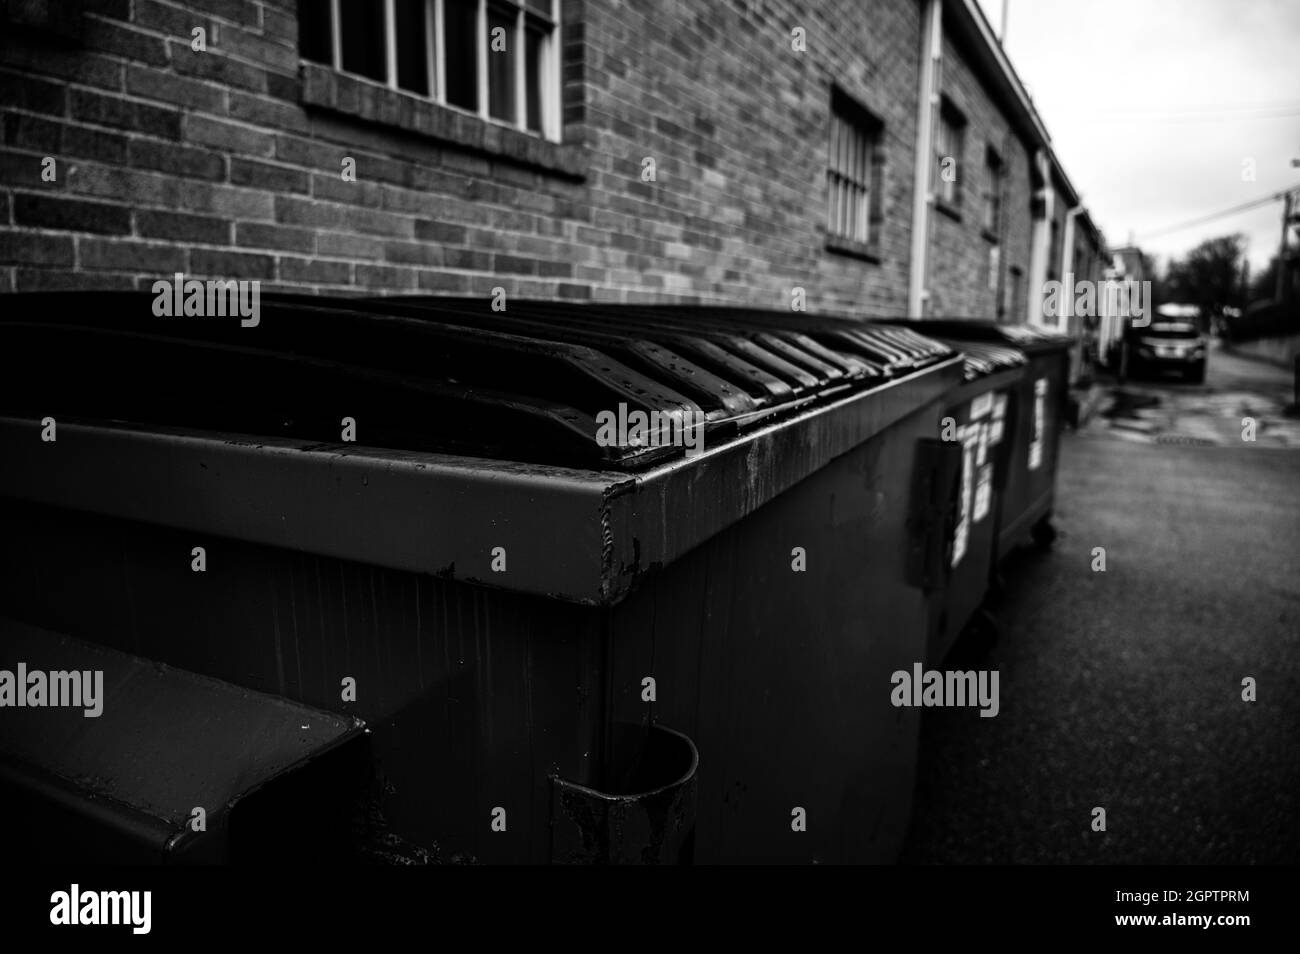 row of covered garbage bins along a brick wall in a back alley Stock Photo